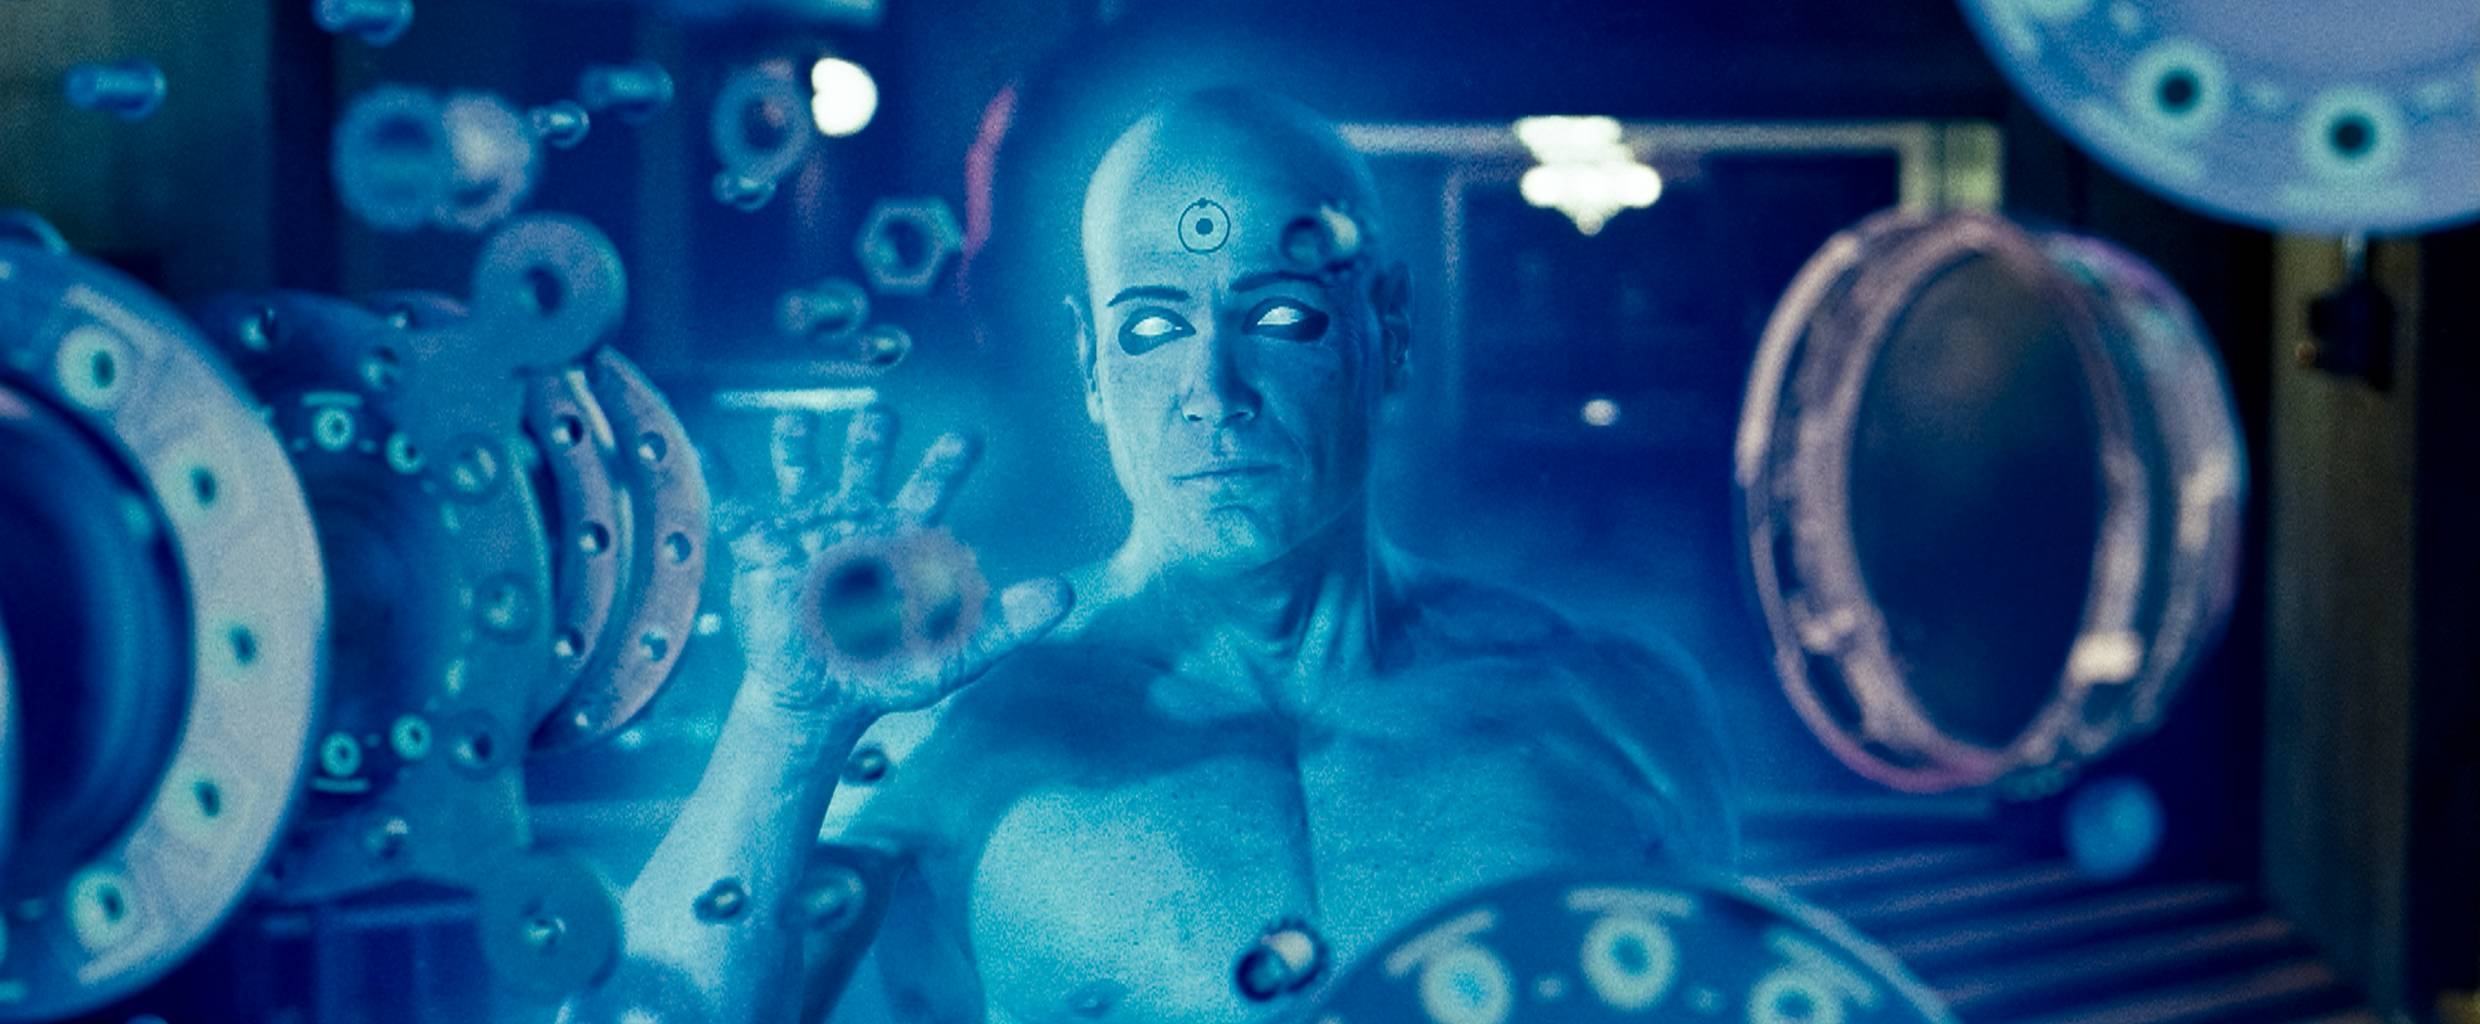 BILLY CRUDUP as Dr. Manhattan in Warner Bros. PicturesÕ, Paramount PicturesÕ and Legendary PicturesÕ ÒWatchmen,Ó distributed by Warner Bros. Pictures. PHOTOGRAPHS TO BE USED SOLELY FOR ADVERTISING, PROMOTION, PUBLICITY OR REVIEWS OF THIS SPECIFIC MOTION PICTURE AND TO REMAIN THE PROPERTY OF THE STUDIO. NOT FOR SALE OR REDISTRIBUTION.